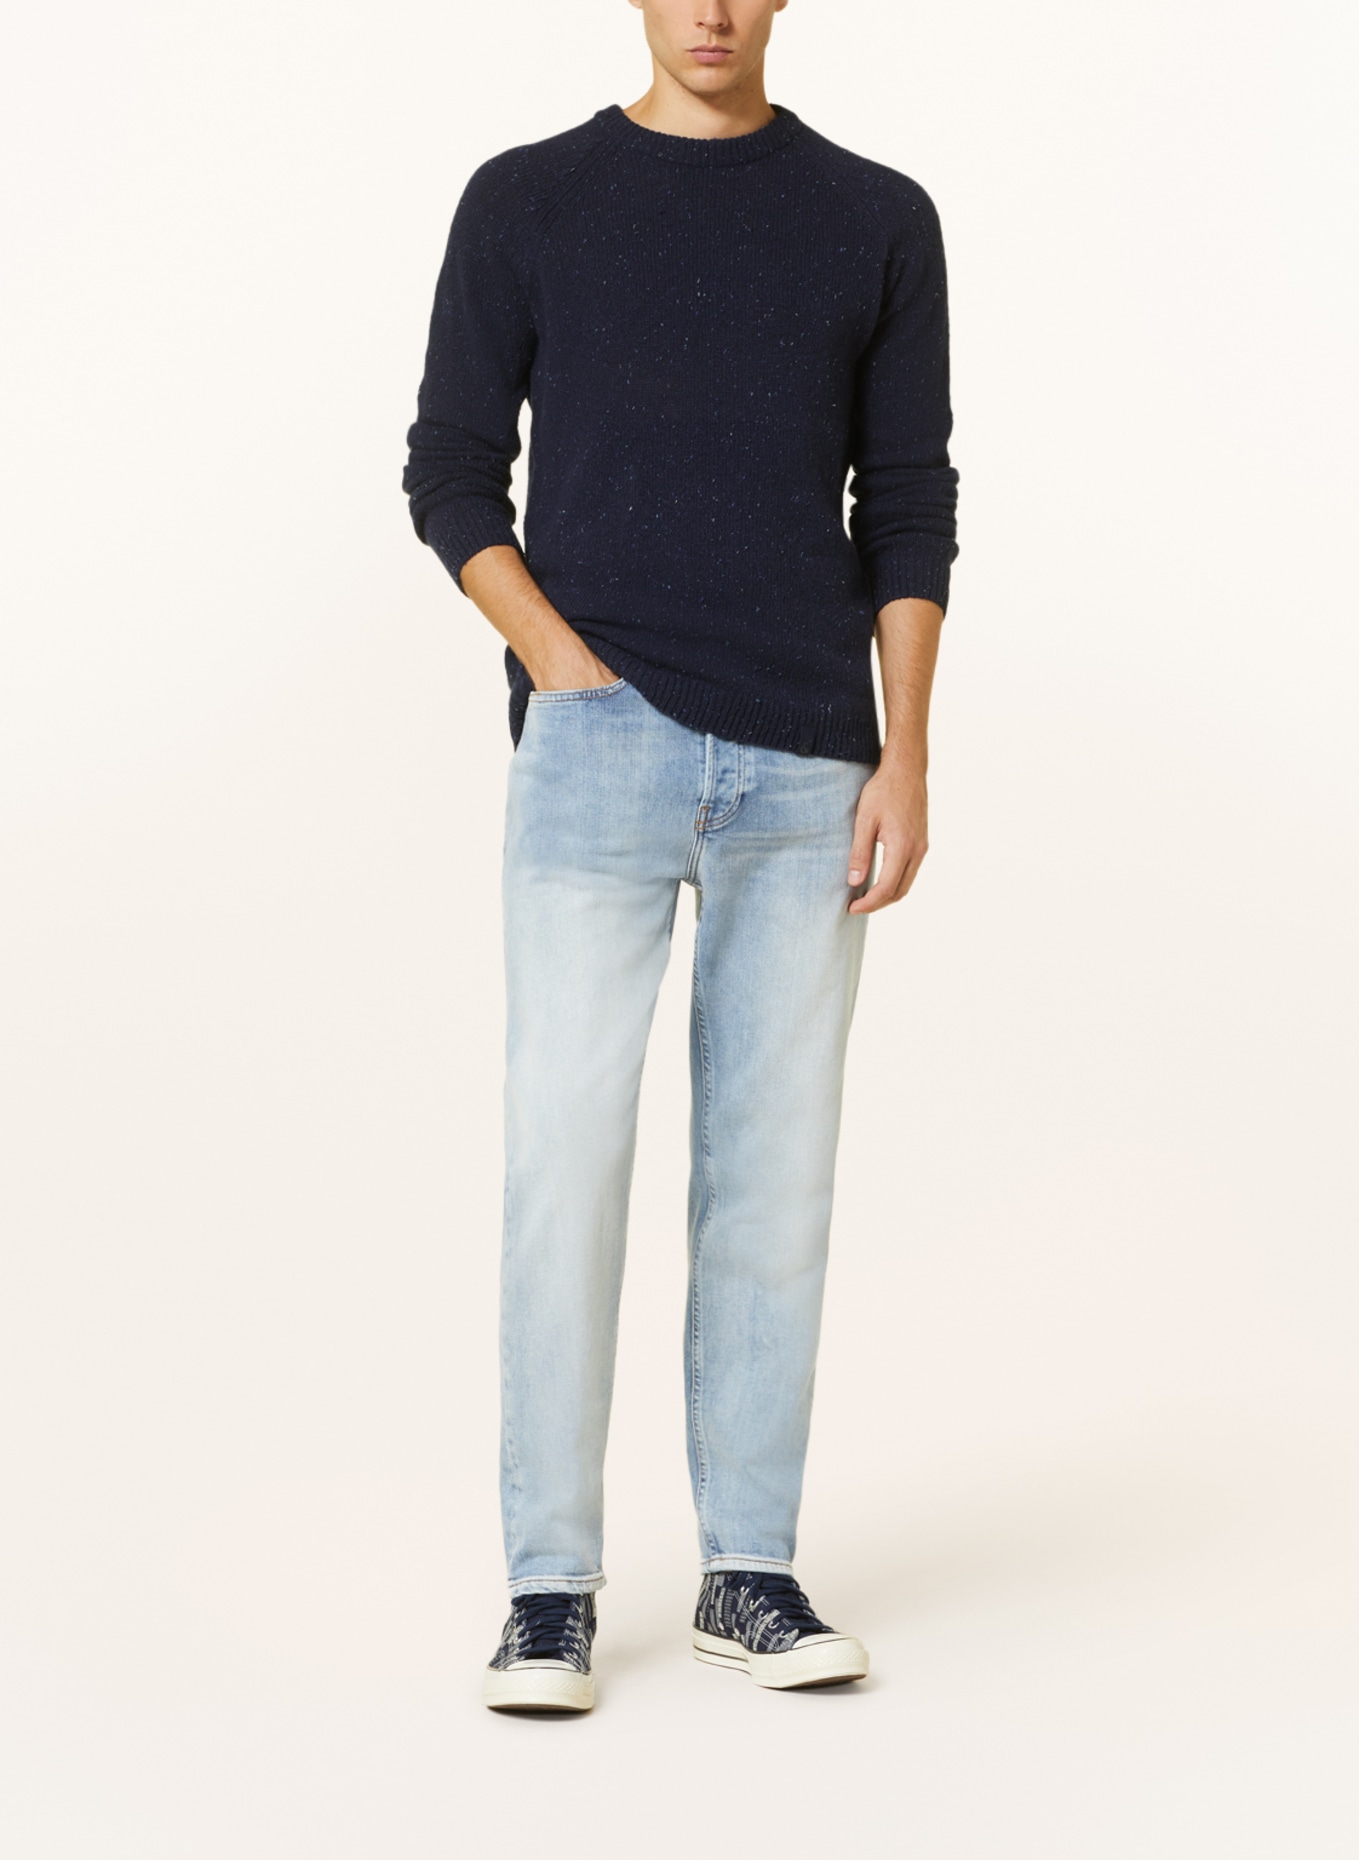 COLOURS & SONS Sweater, Color: DARK BLUE (Image 2)